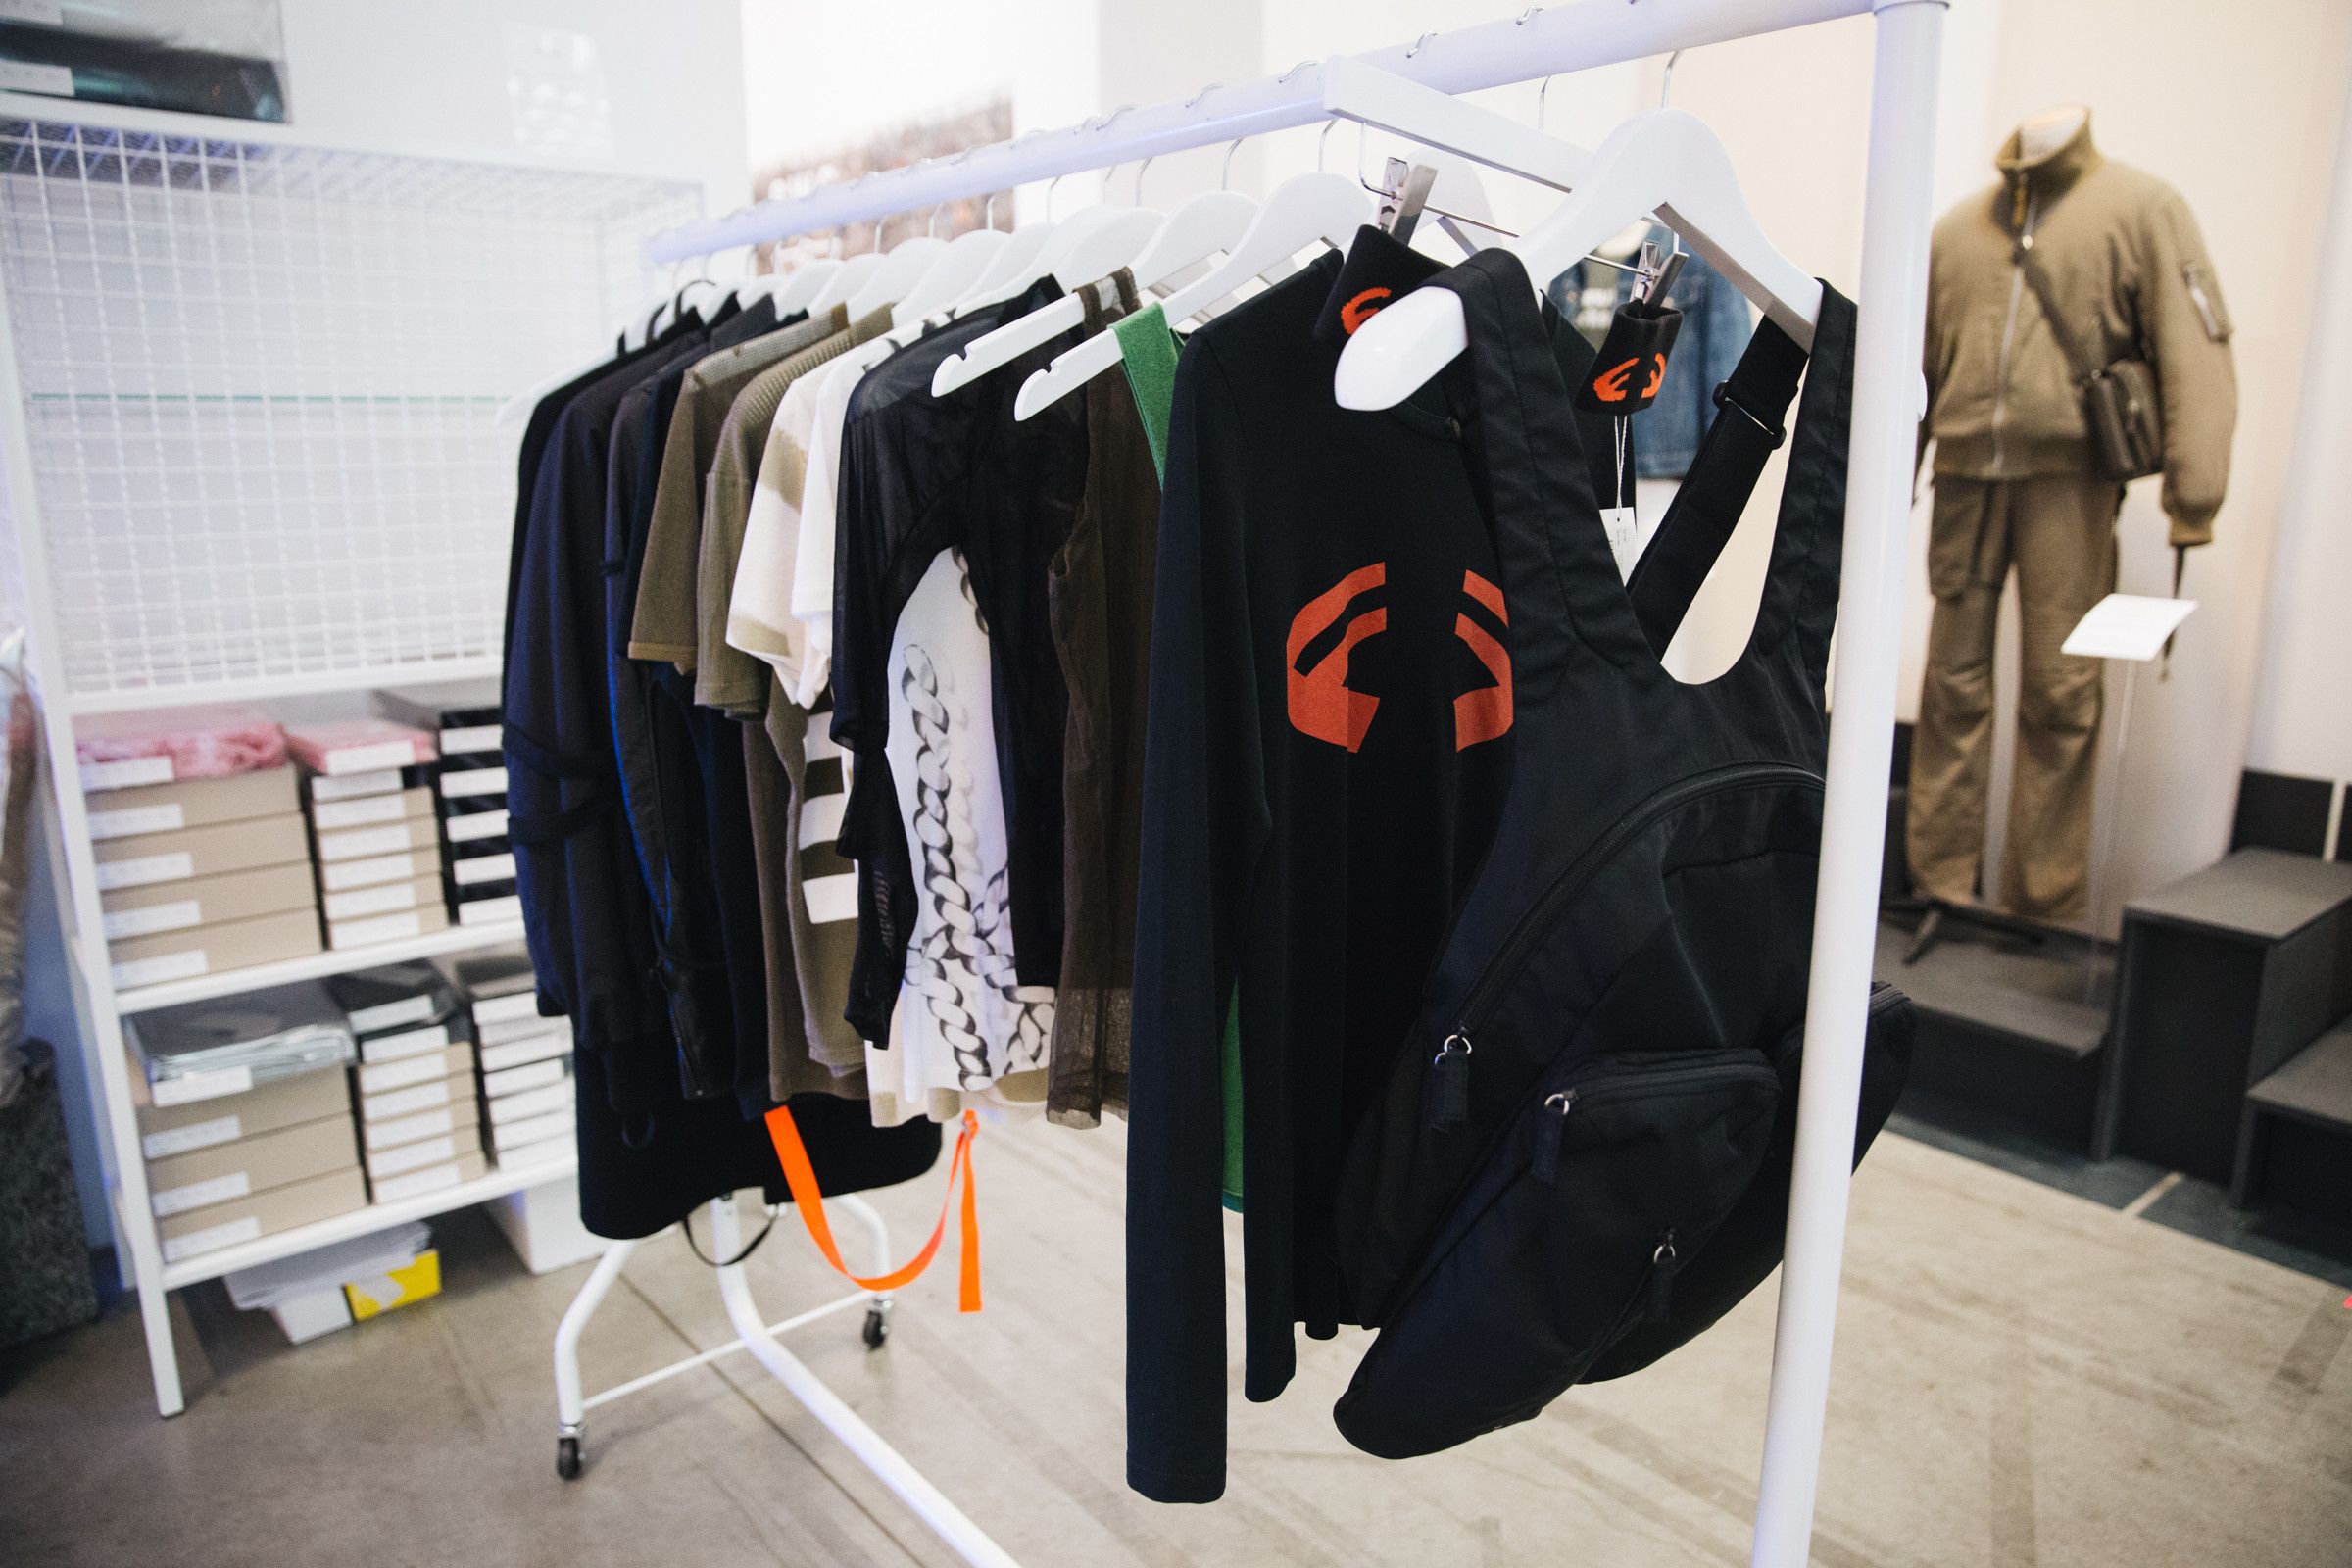 ENDYMA: AN ARCHIVE FOR FASHION AFICIONADOS TO STUDY WITH PIECES